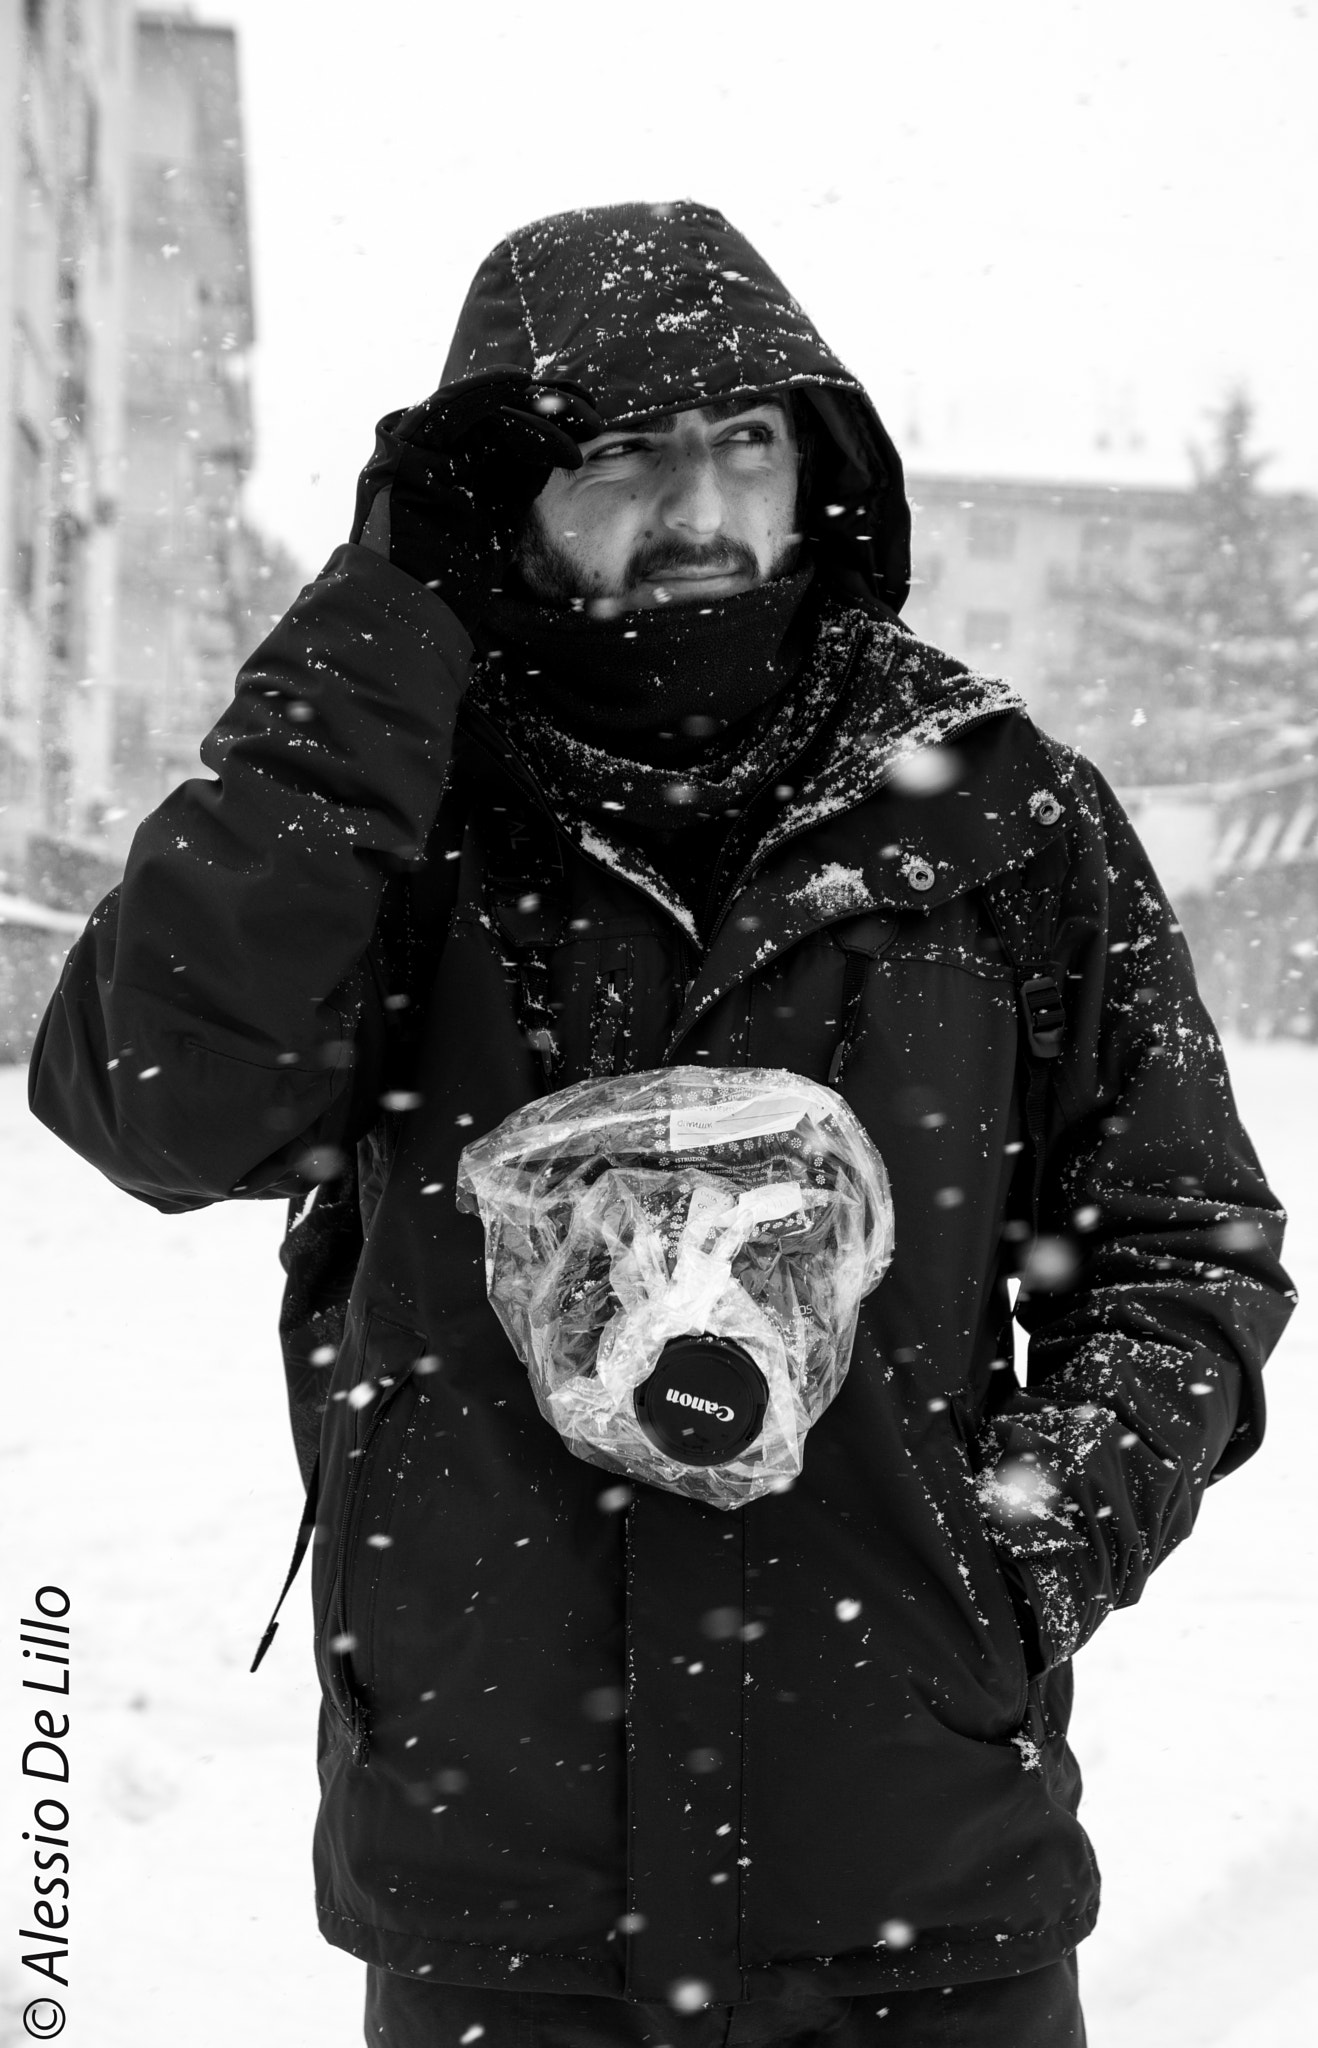 Nikon D7200 + Tamron SP AF 17-50mm F2.8 XR Di II LD Aspherical (IF) sample photo. Brother in the snow photography